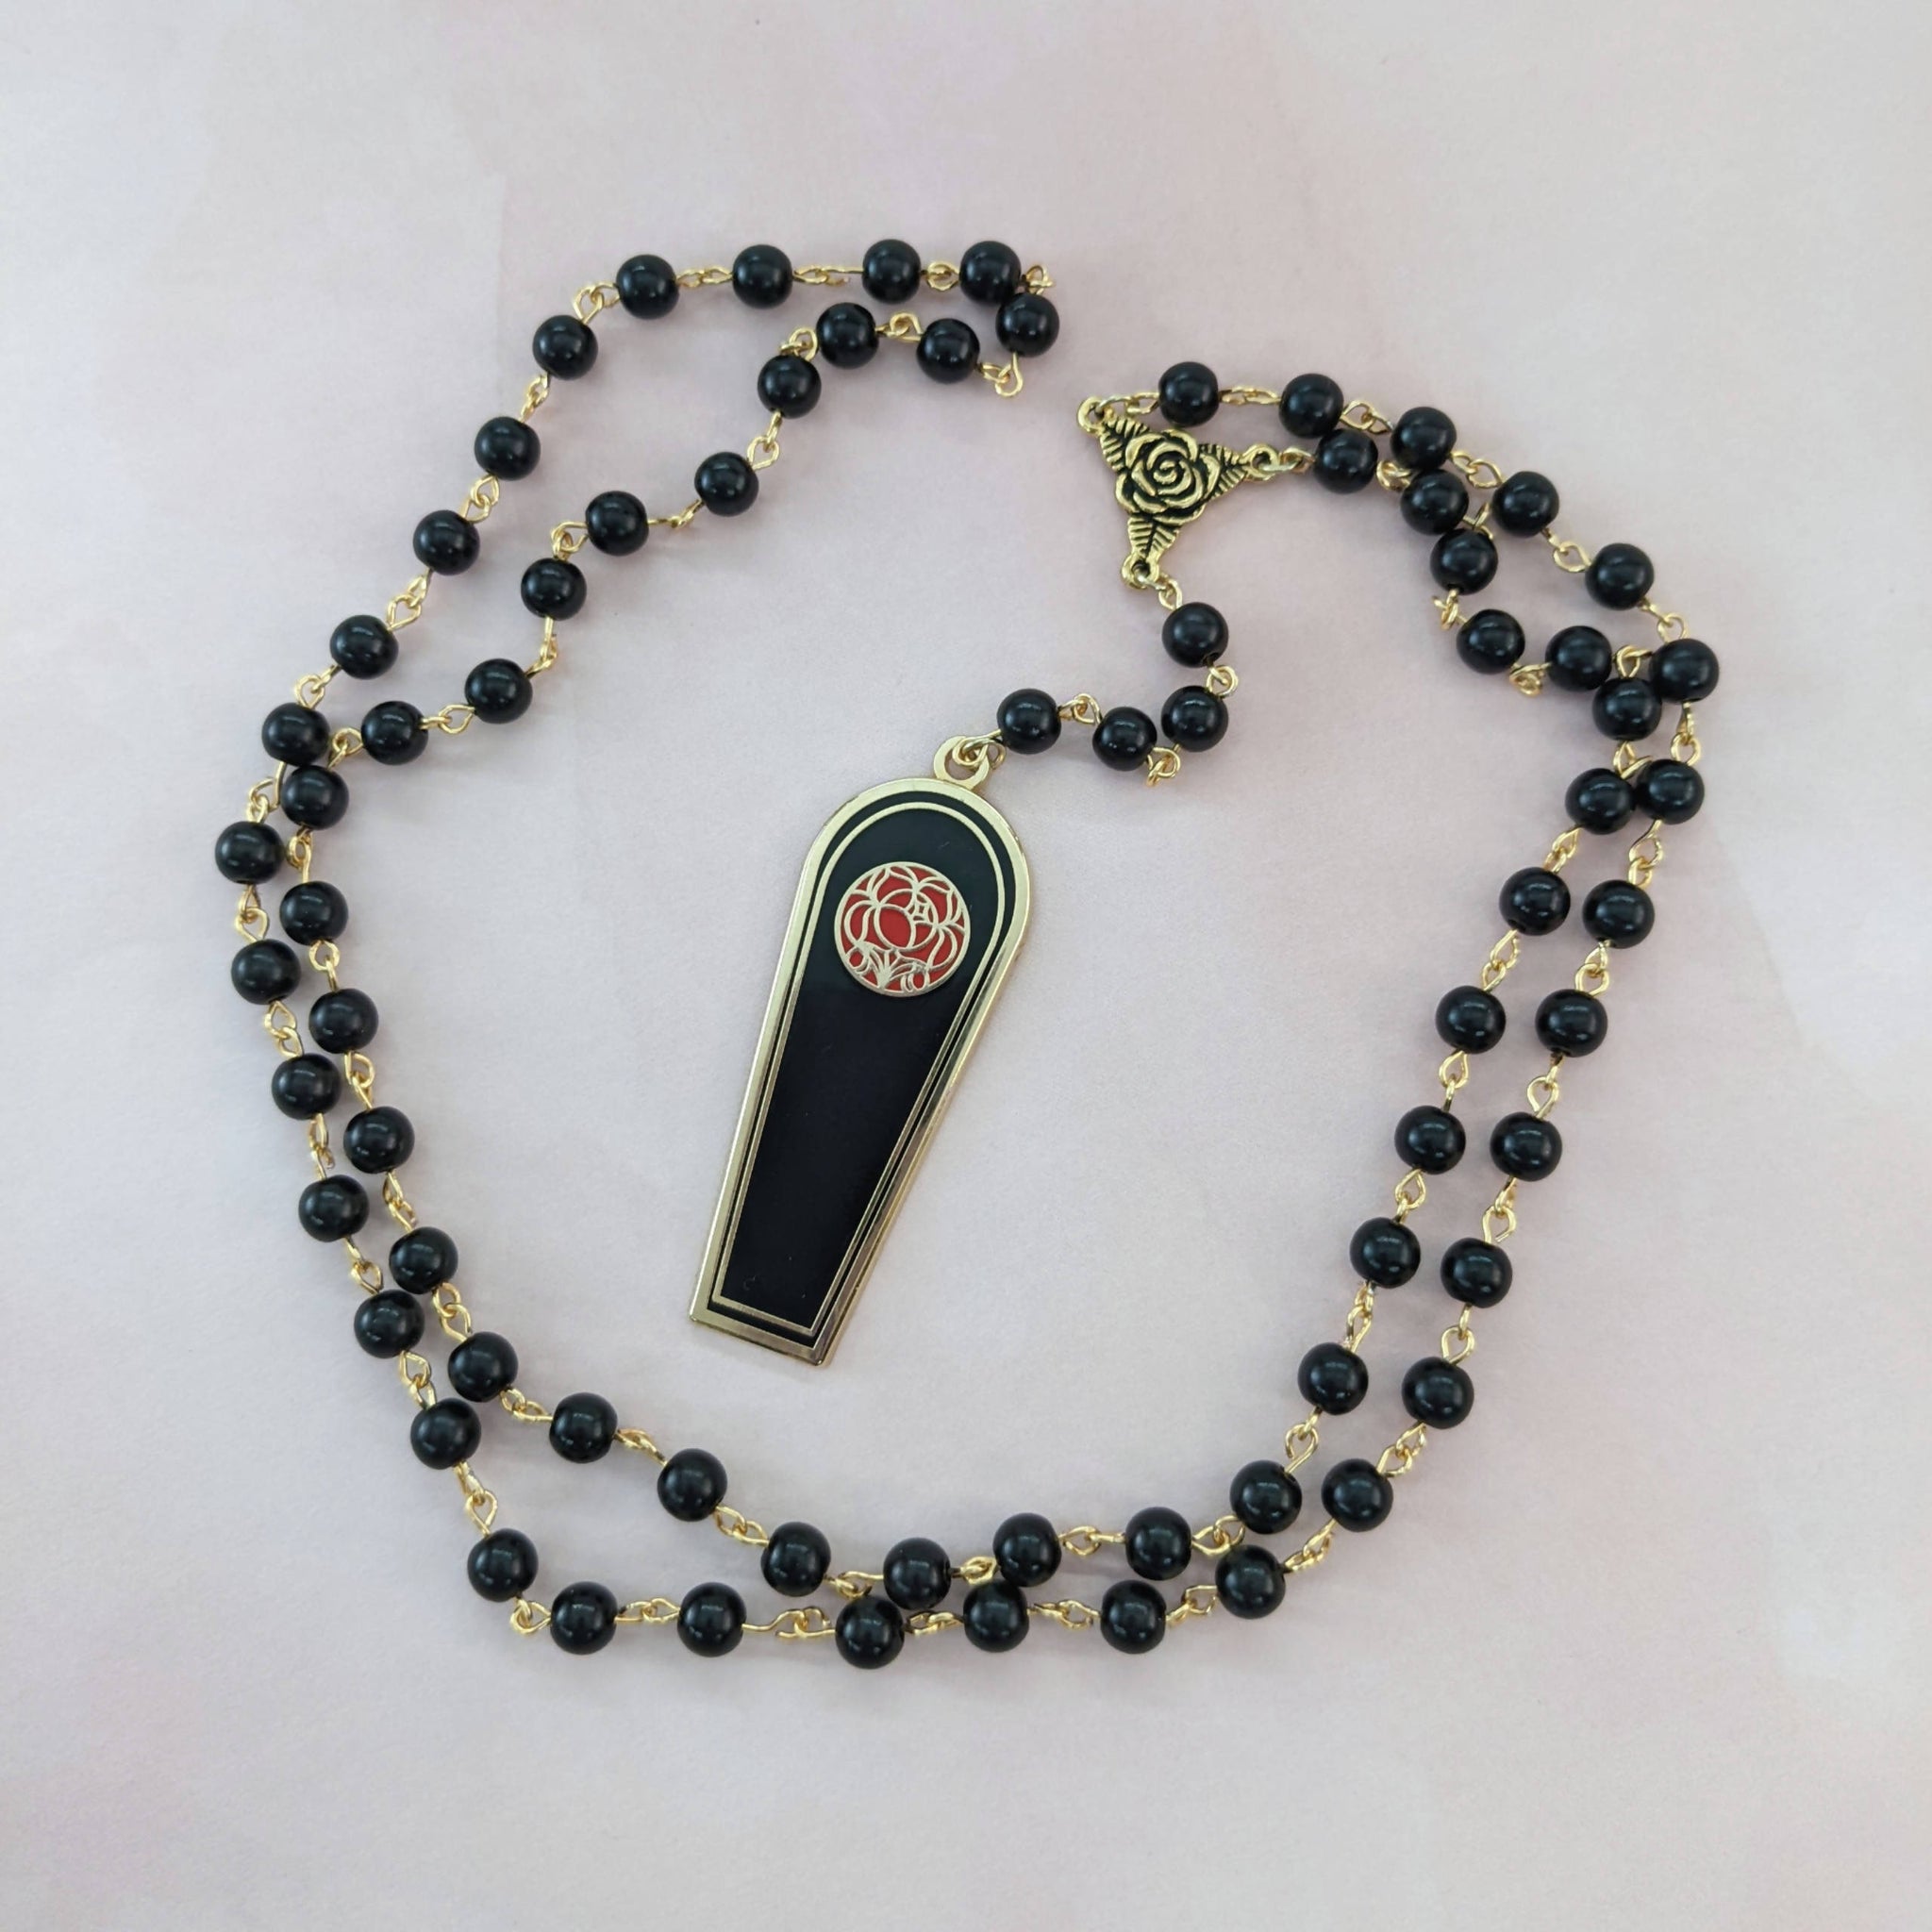 Utena Rose Seal Coffin Rosary Necklace